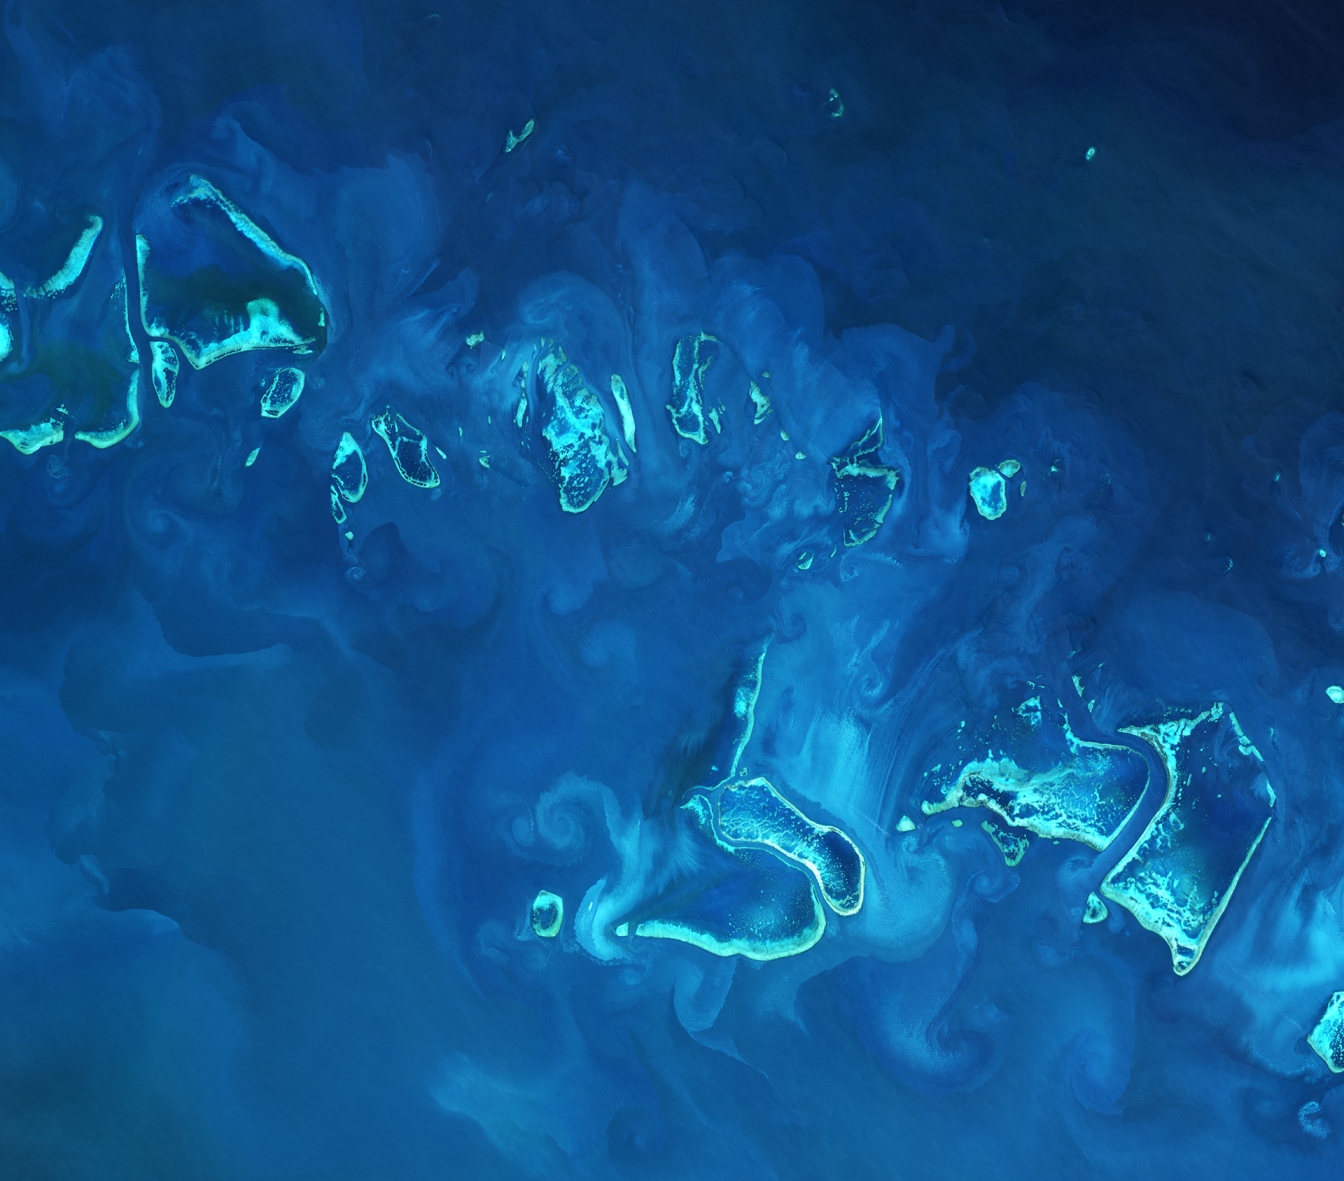 Great Barrier Reef image from Sentinel 2A satellite